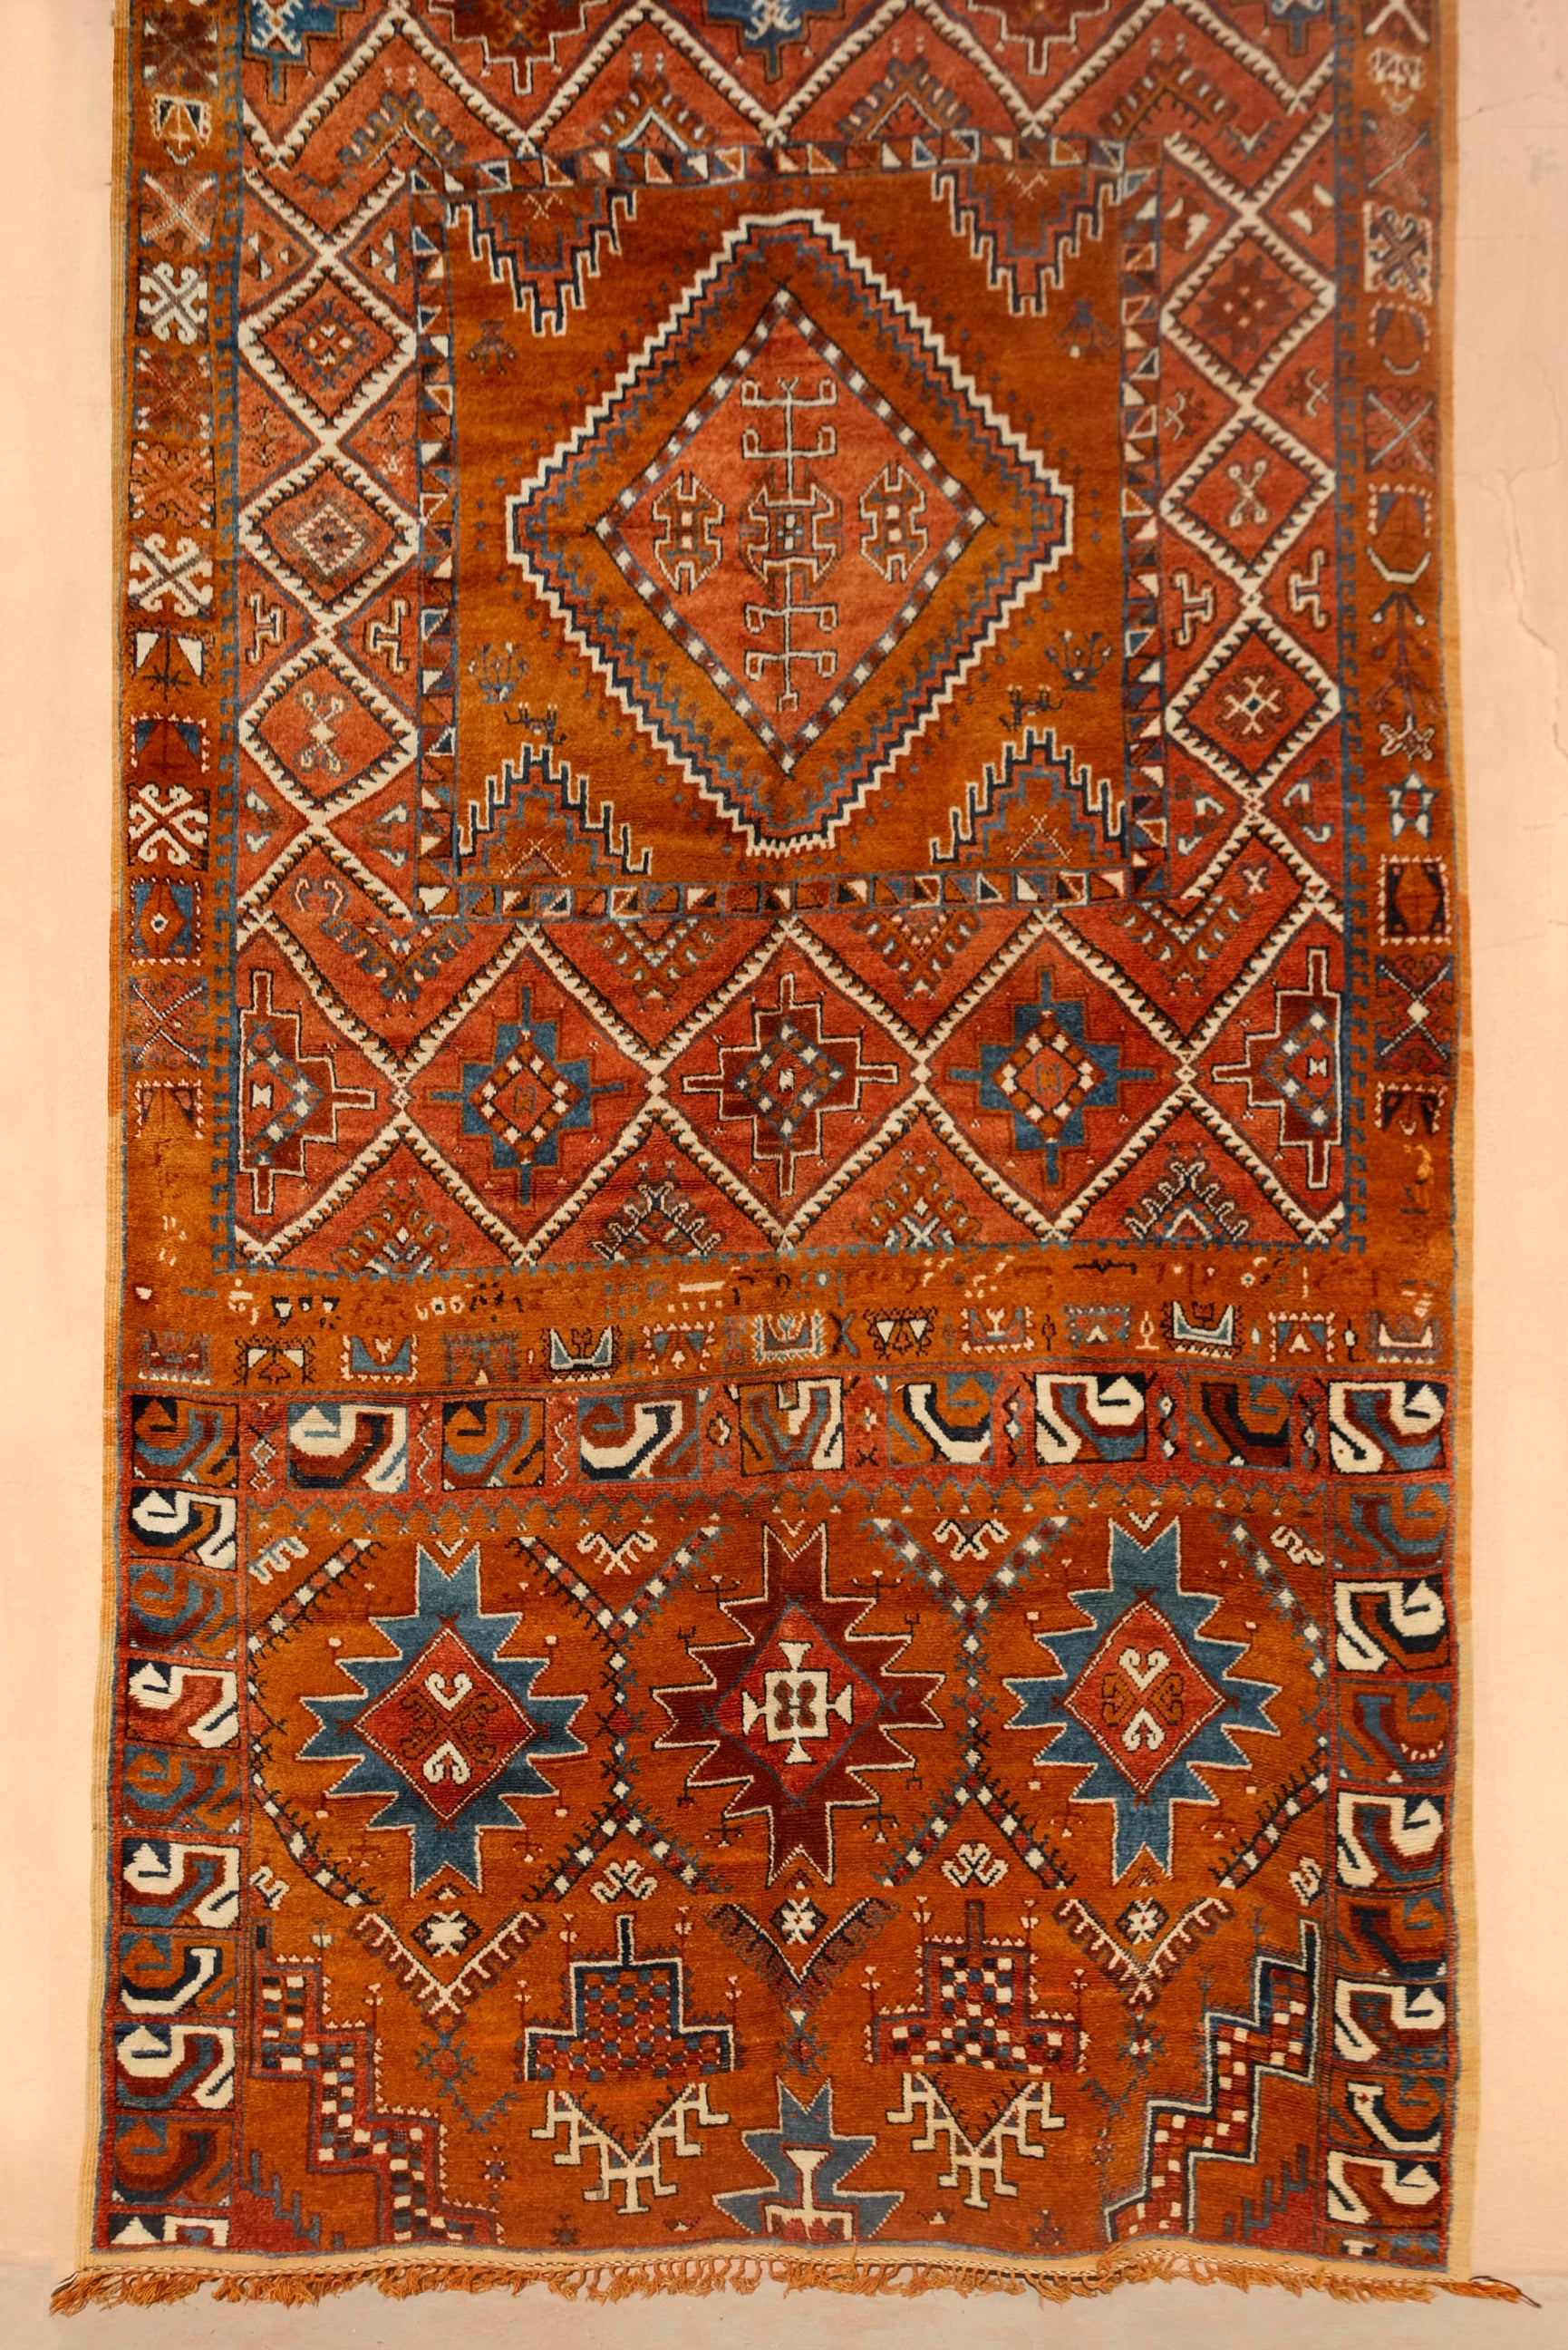  Explore unparalleled beauty with our Atlas Heritage Radiance Glawi Rug. Meticulously crafted using the highest weaving technique in the High Atlas Mountains, this museum-quality rug is a rare find. With natural dyes and a distinctive reddish-brown tone, this 50-year-old new, dead-stock piece is a unique testament to traditional craftsmanship. Limited availability.